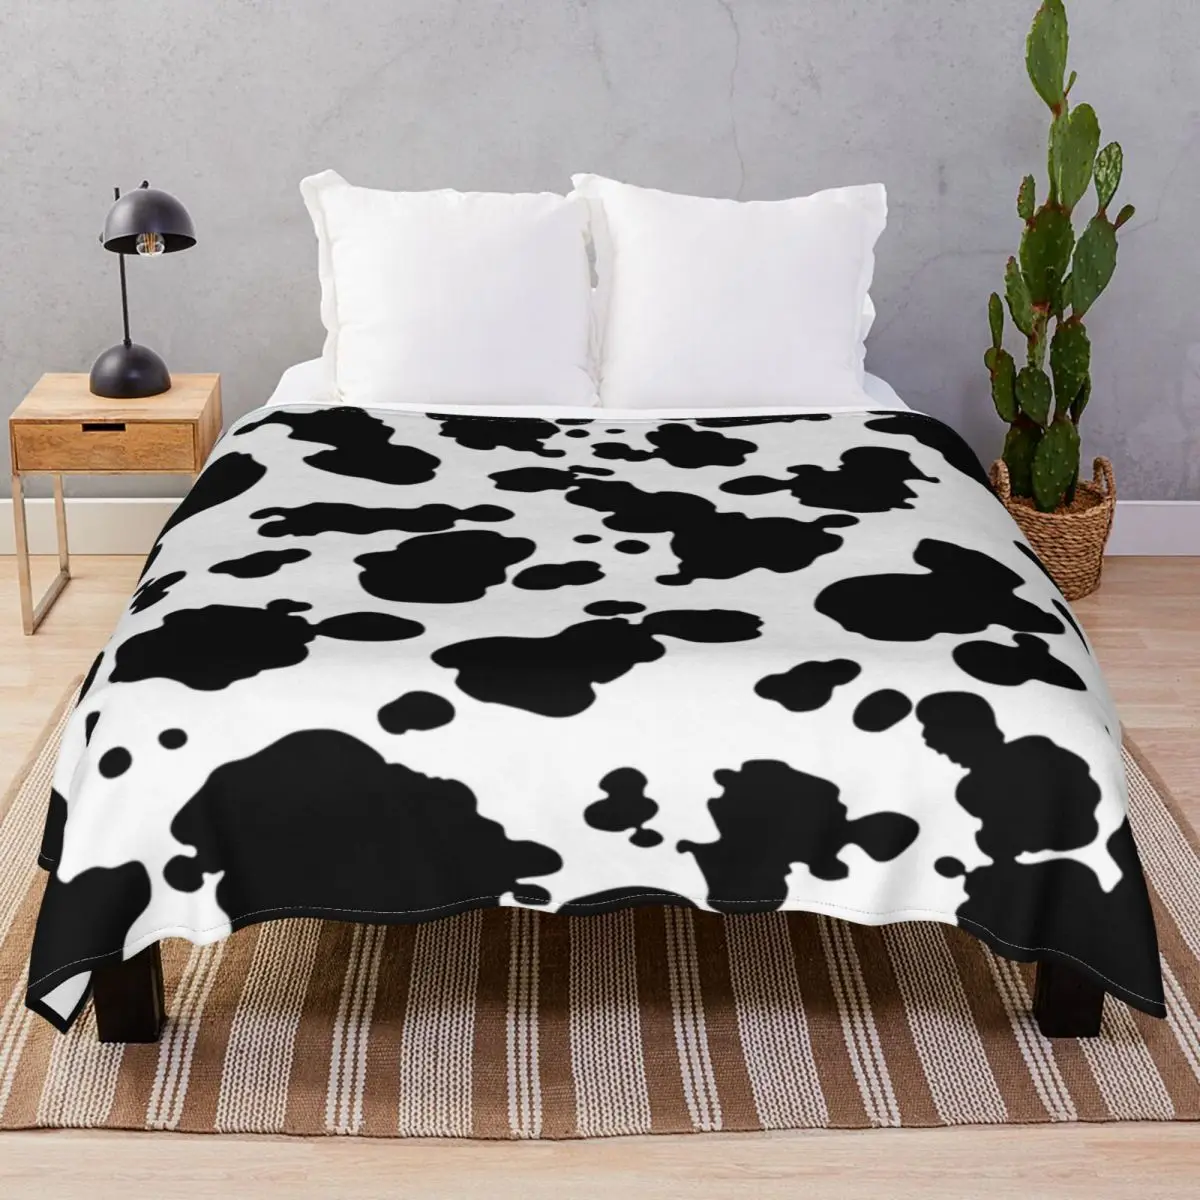 Cow Print Blankets Fleece Decoration Comfortable Unisex Throw Blanket for Bed Home Couch Camp Office